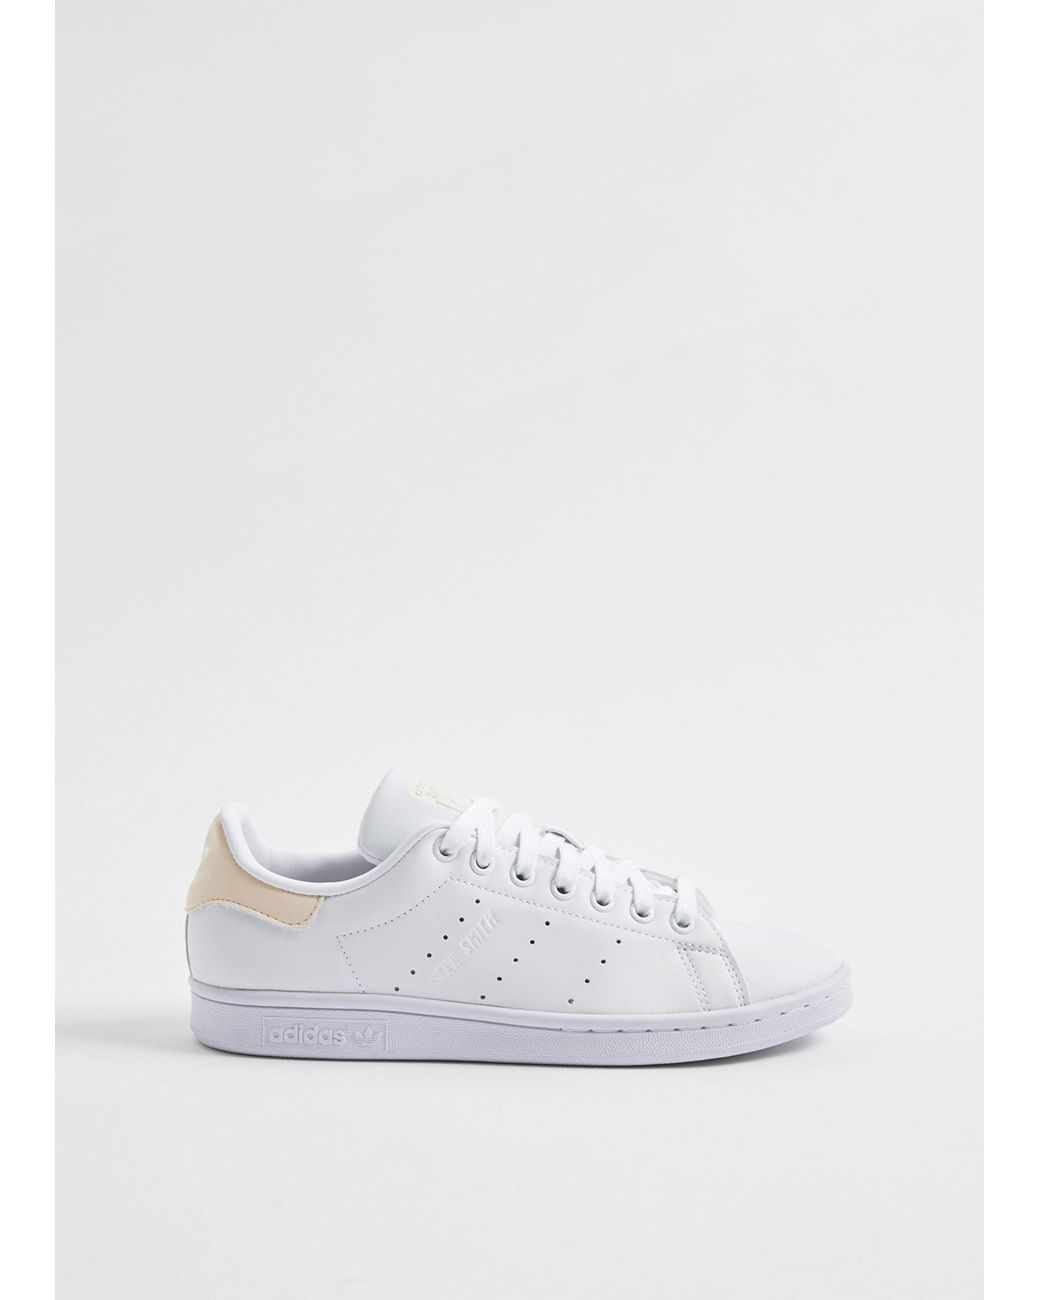 Other Stories Adidas Stan in | Lyst Australia